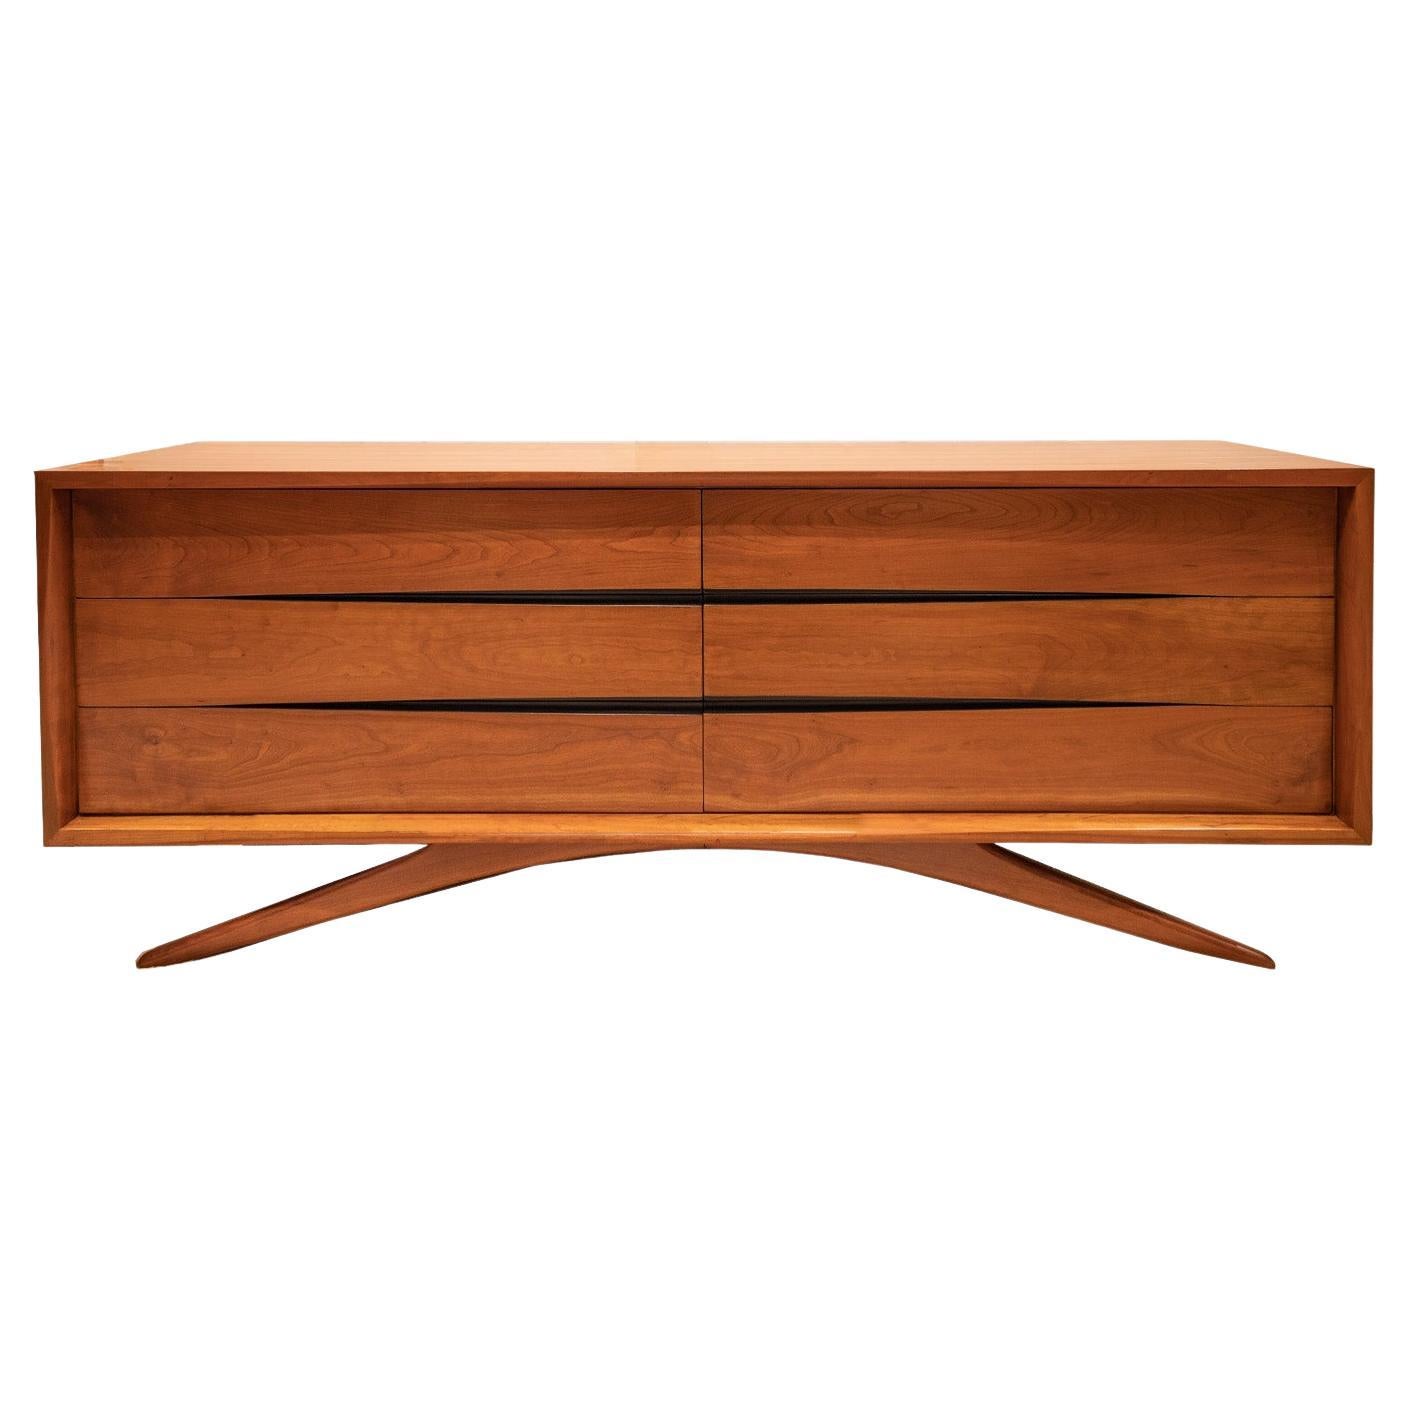 Vladimir Kagan Rare and Iconic Large Chest of Drawers in Walnut, 1950s